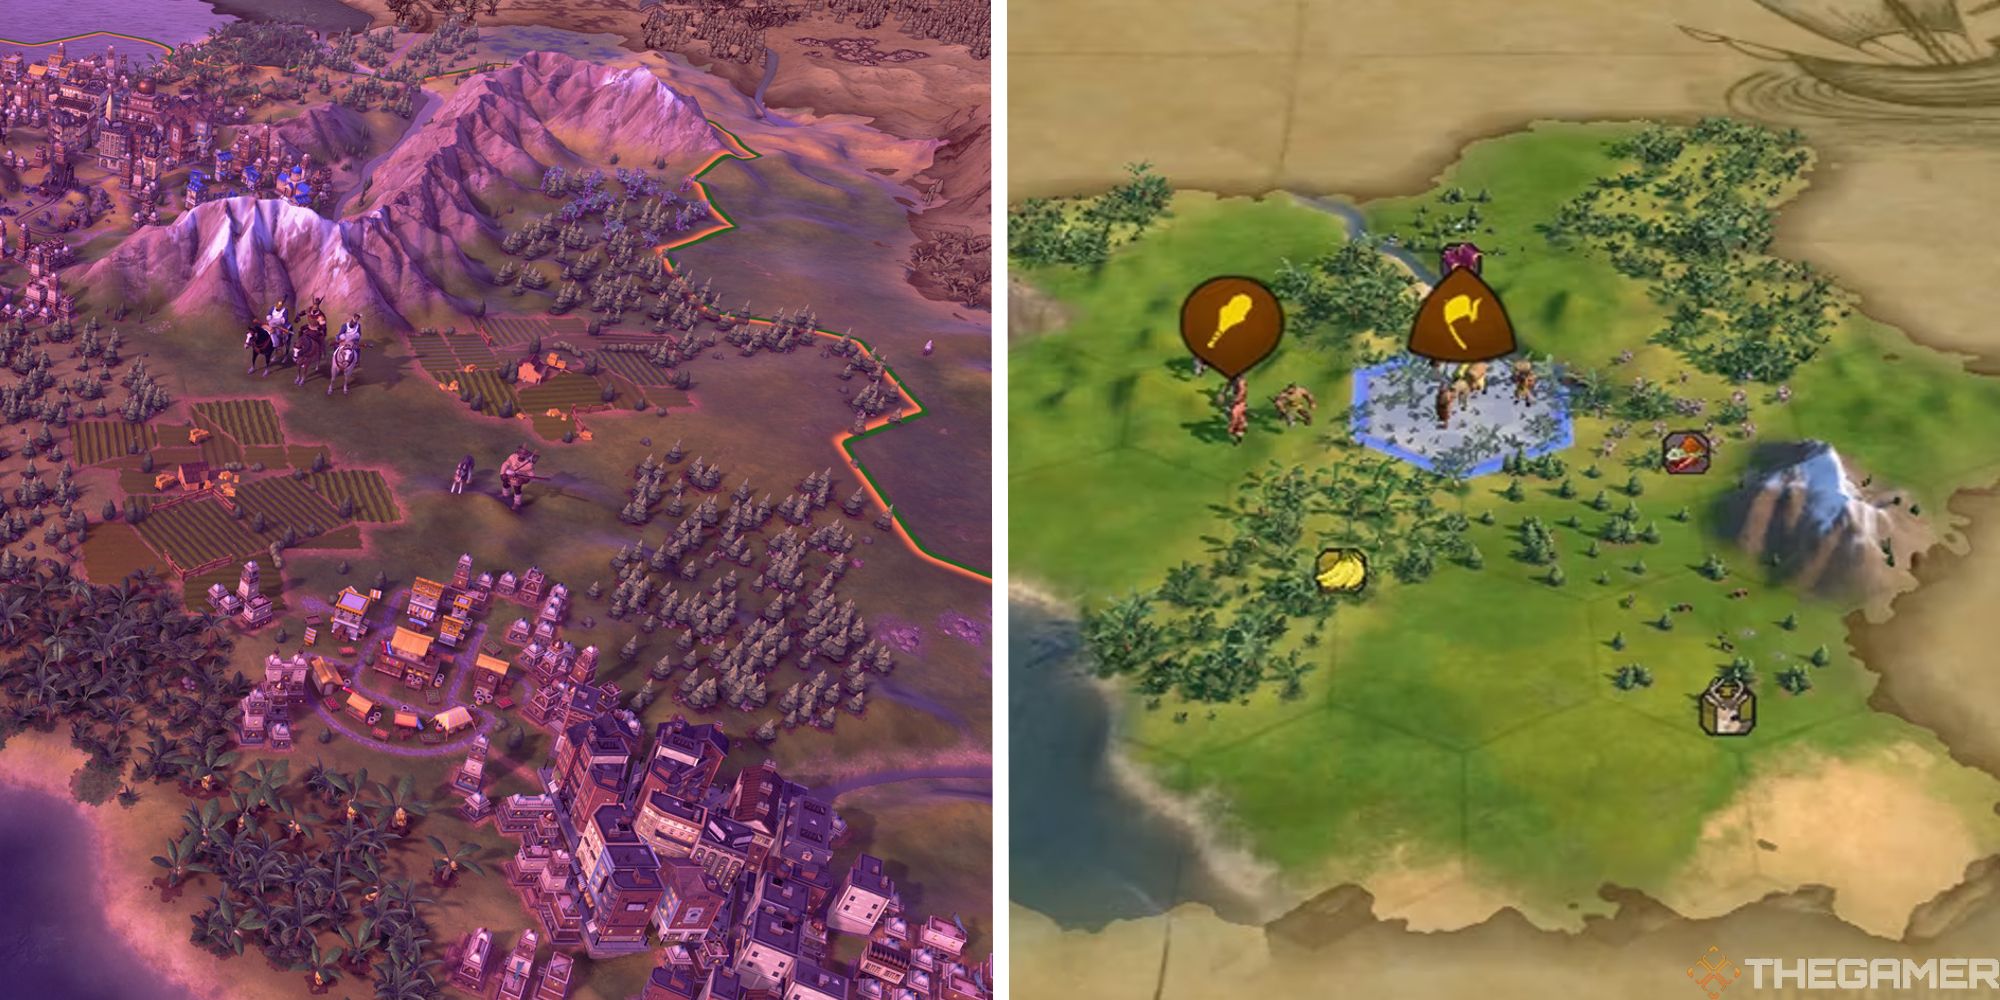 split image showing grown city during sunset, next to image of settler and warrior standing near rainforest tiles